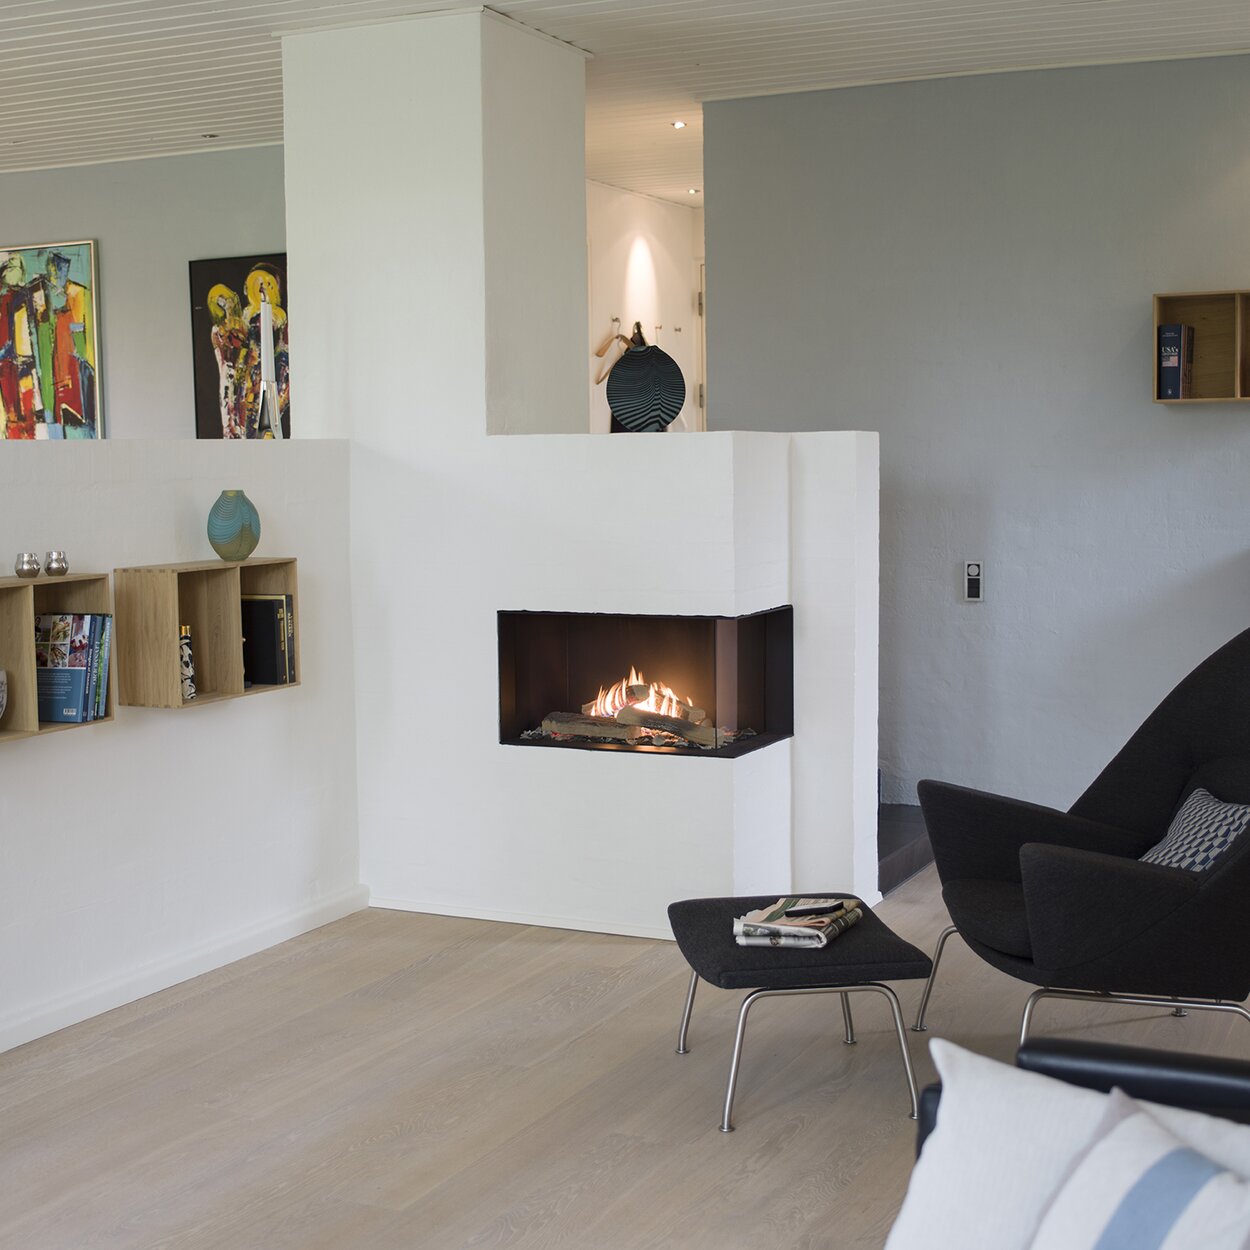 VISIO 70 RC gas fireplace stands as a corner fireplace on the right in the entrance area of an artistic flat and is thus at the centre of various rooms